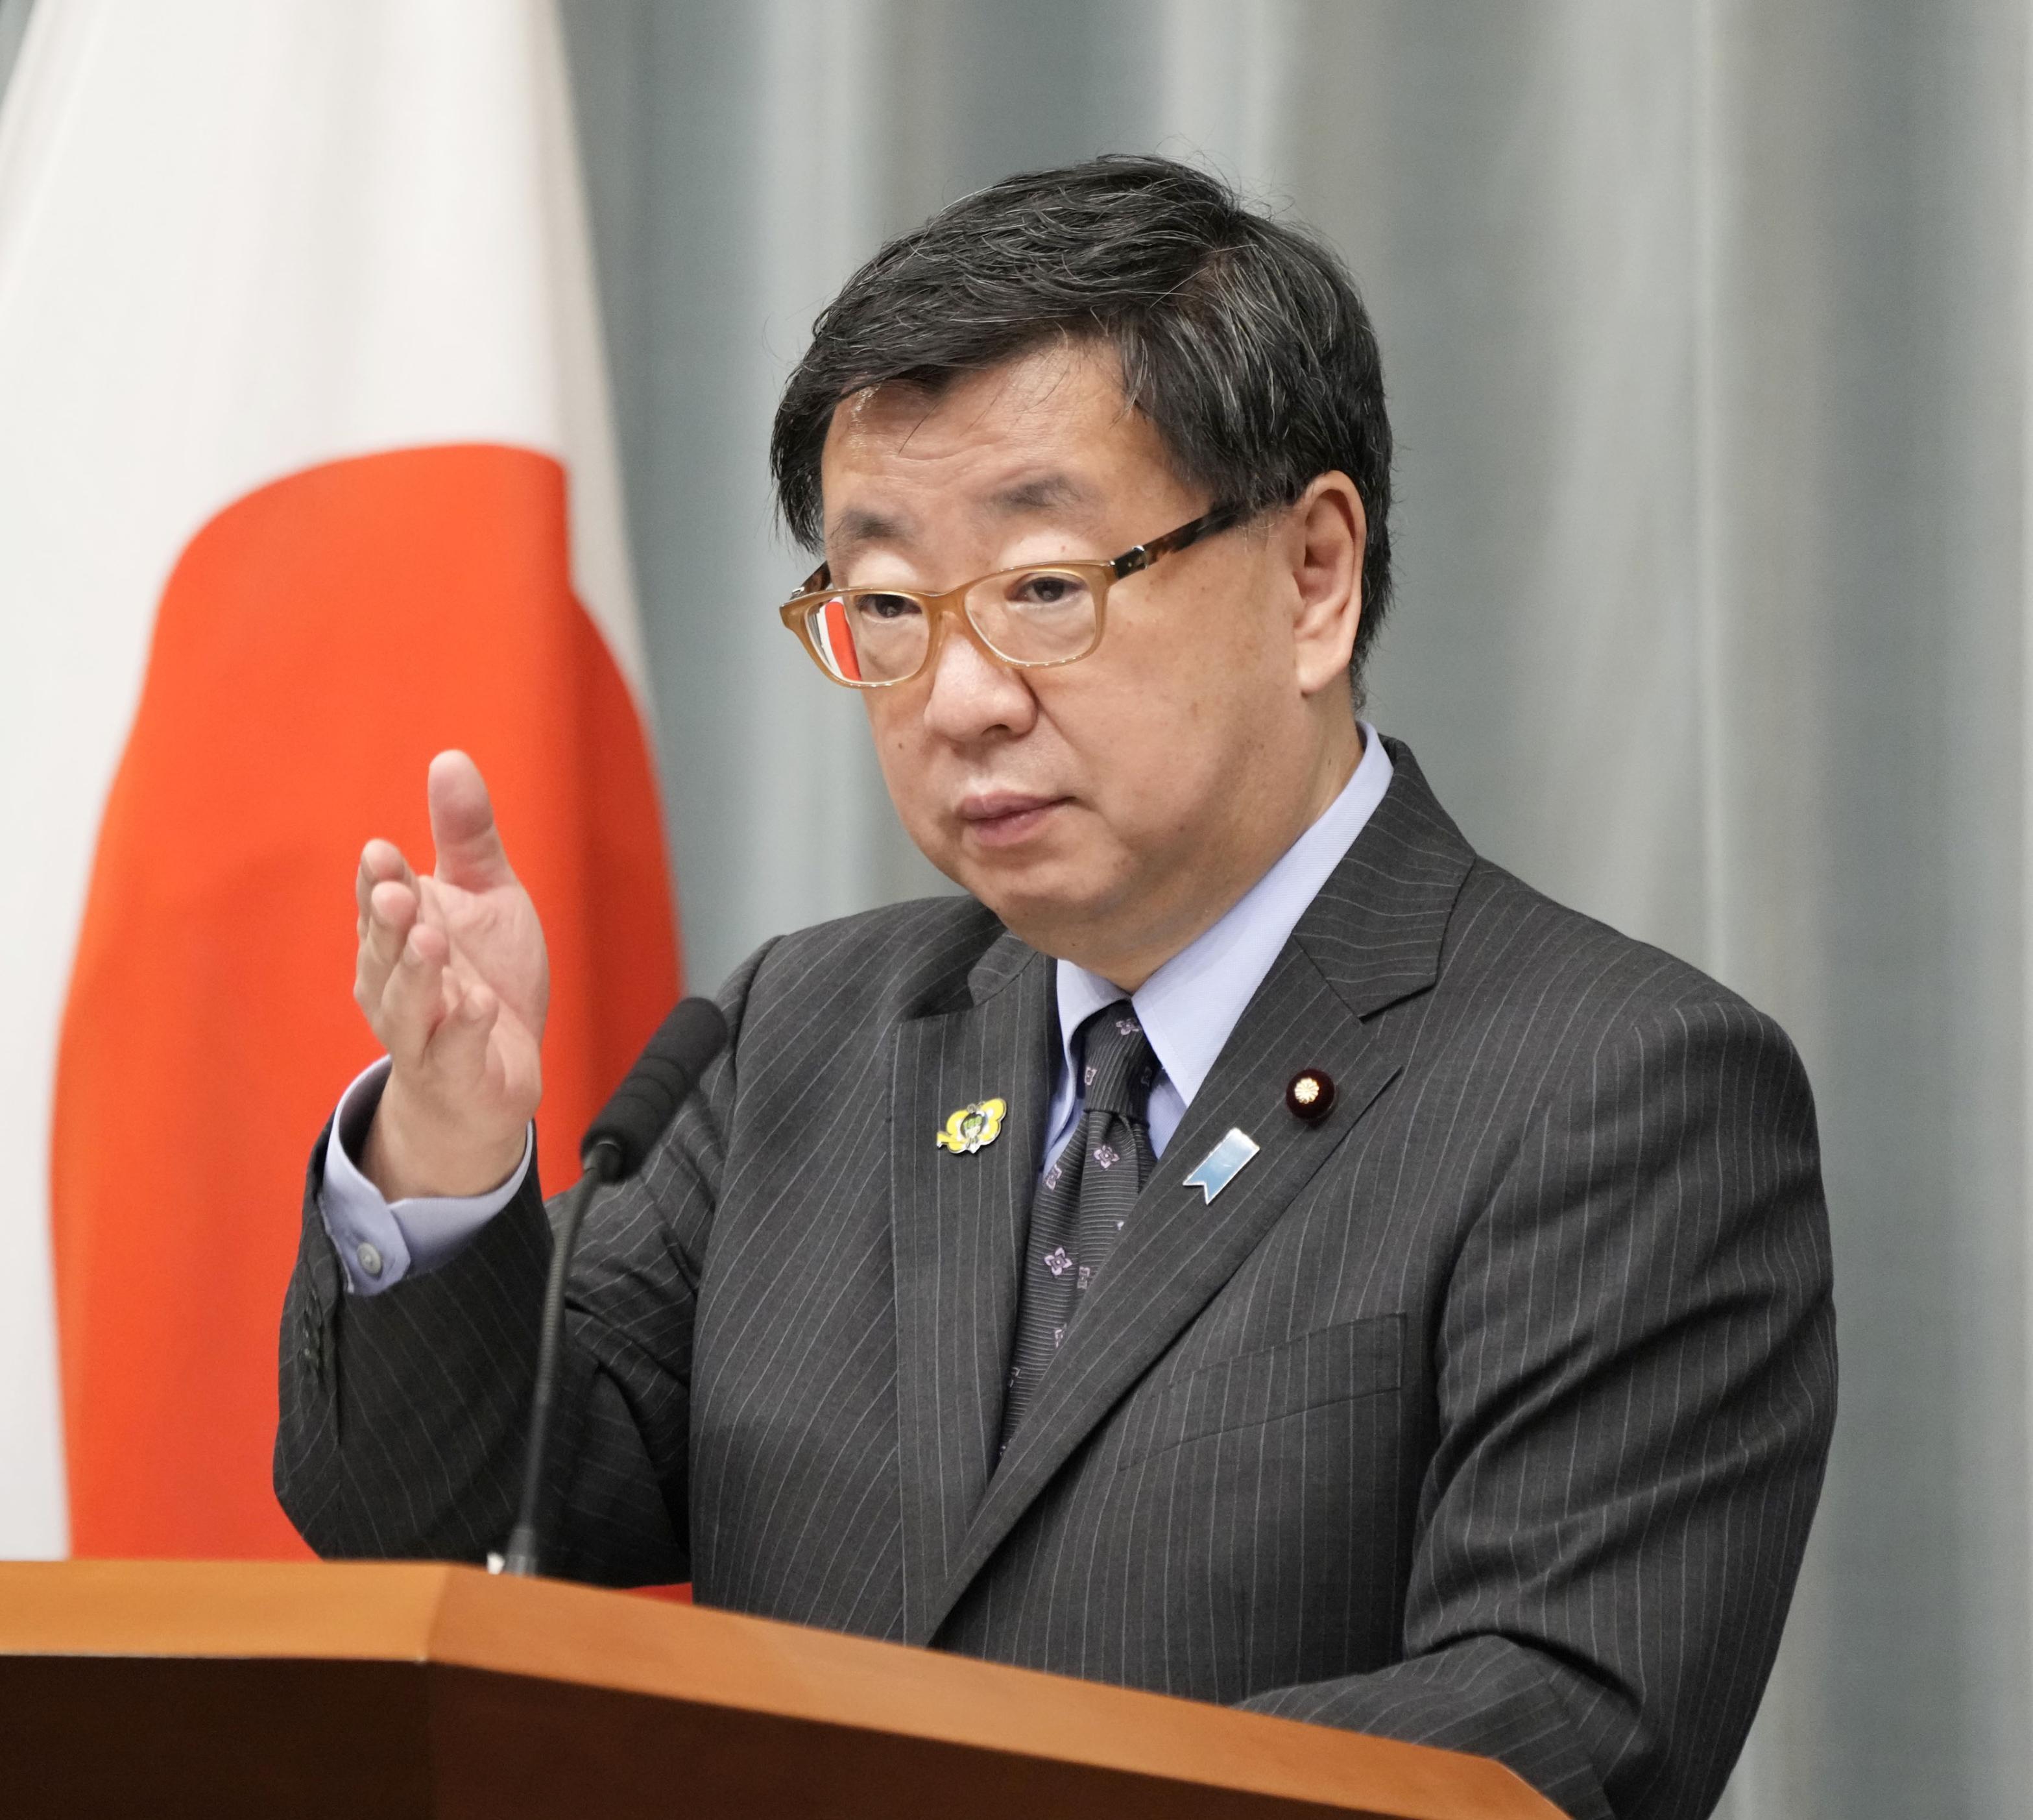 Japanese Chief Cabinet Secretary Hirokazu Matsuno attends a press conference at the prime minister's office in Tokyo, Japan, on April 28.